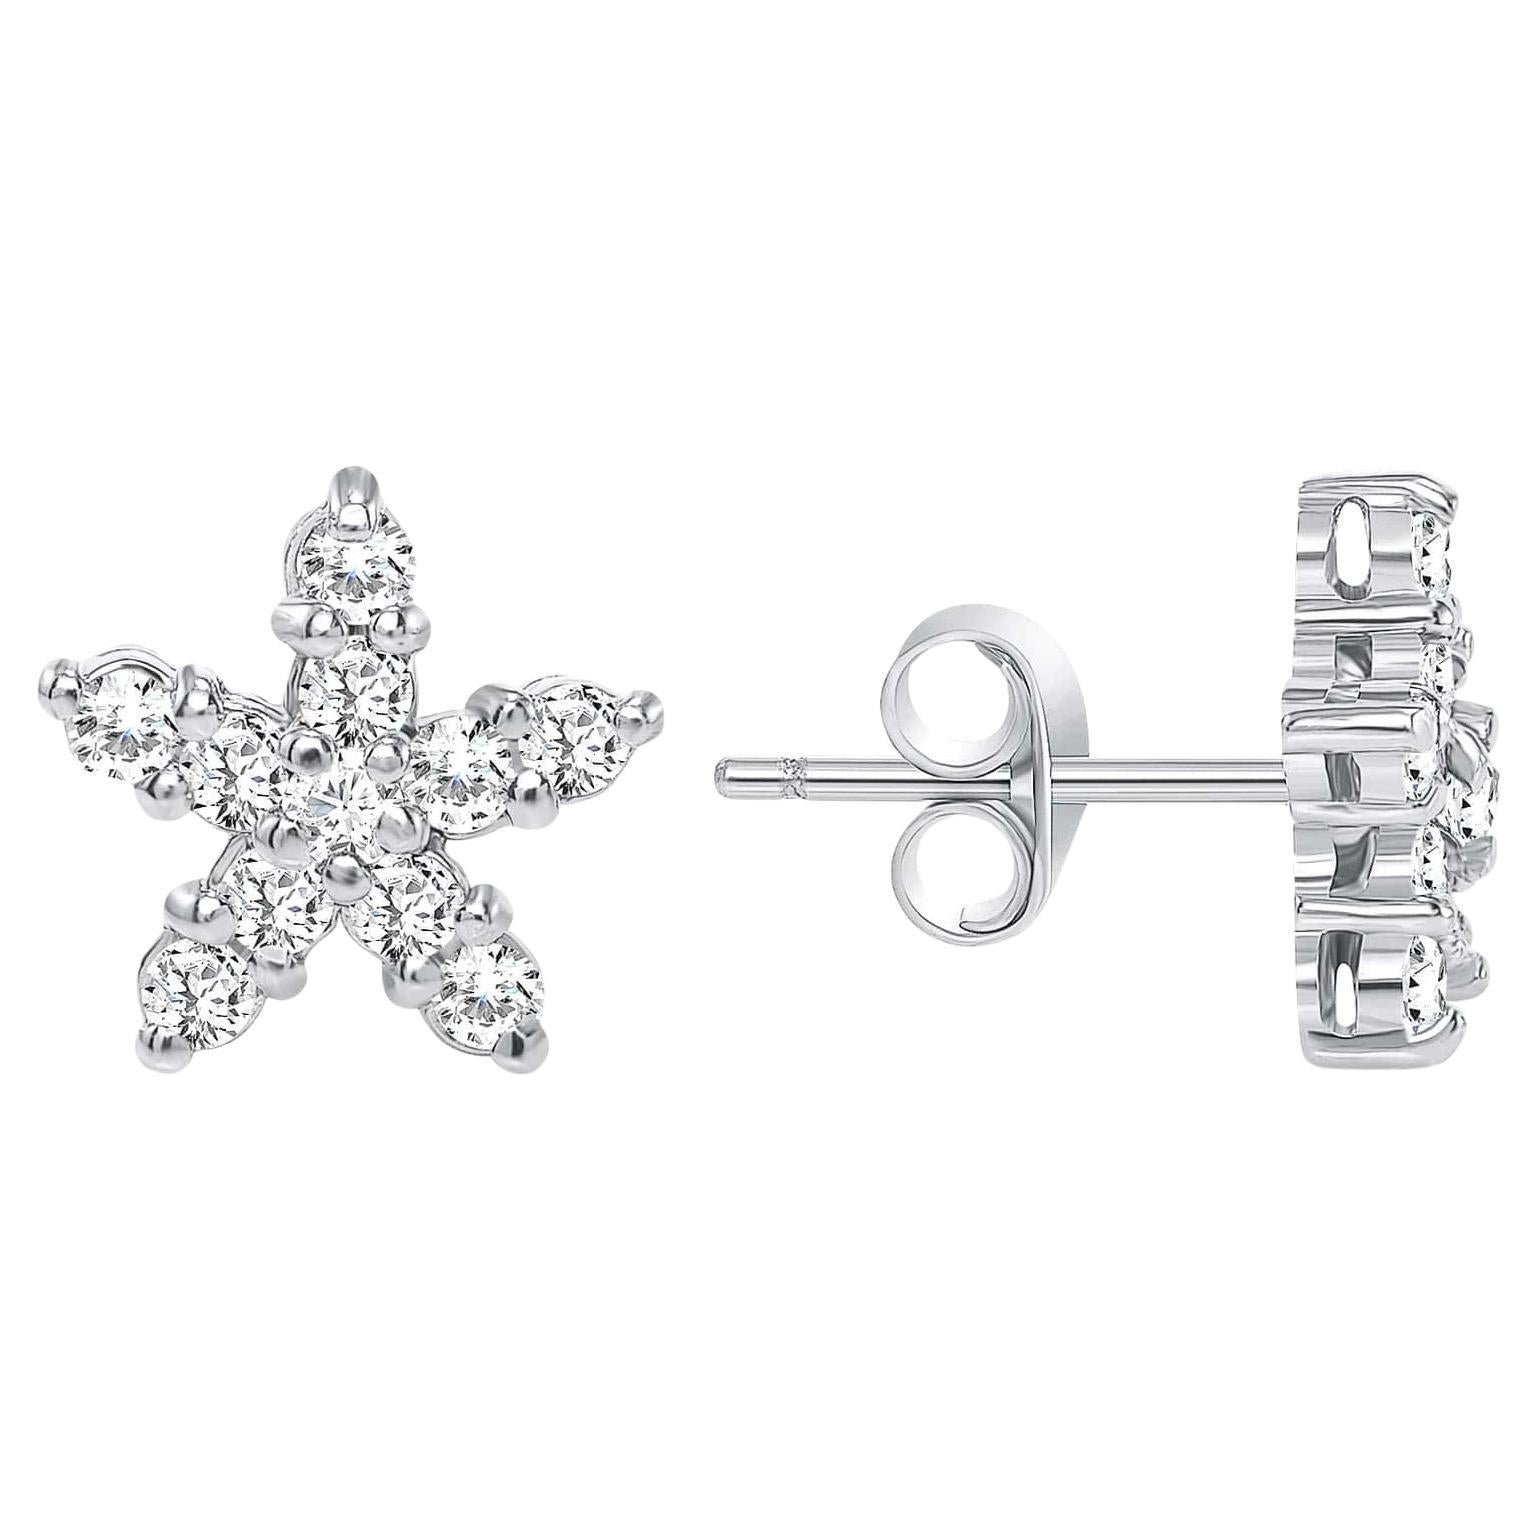 These beautifully star-shaped pair of unique earrings feature amazing Round Cut Diamonds in a stunning pave setting. 

Earring Information
Setting : Pave Setting Push Back
Metal : 14k Gold, 18k Gold, Platinum
Diamond Carat Weight : 1 Carat
Diamond